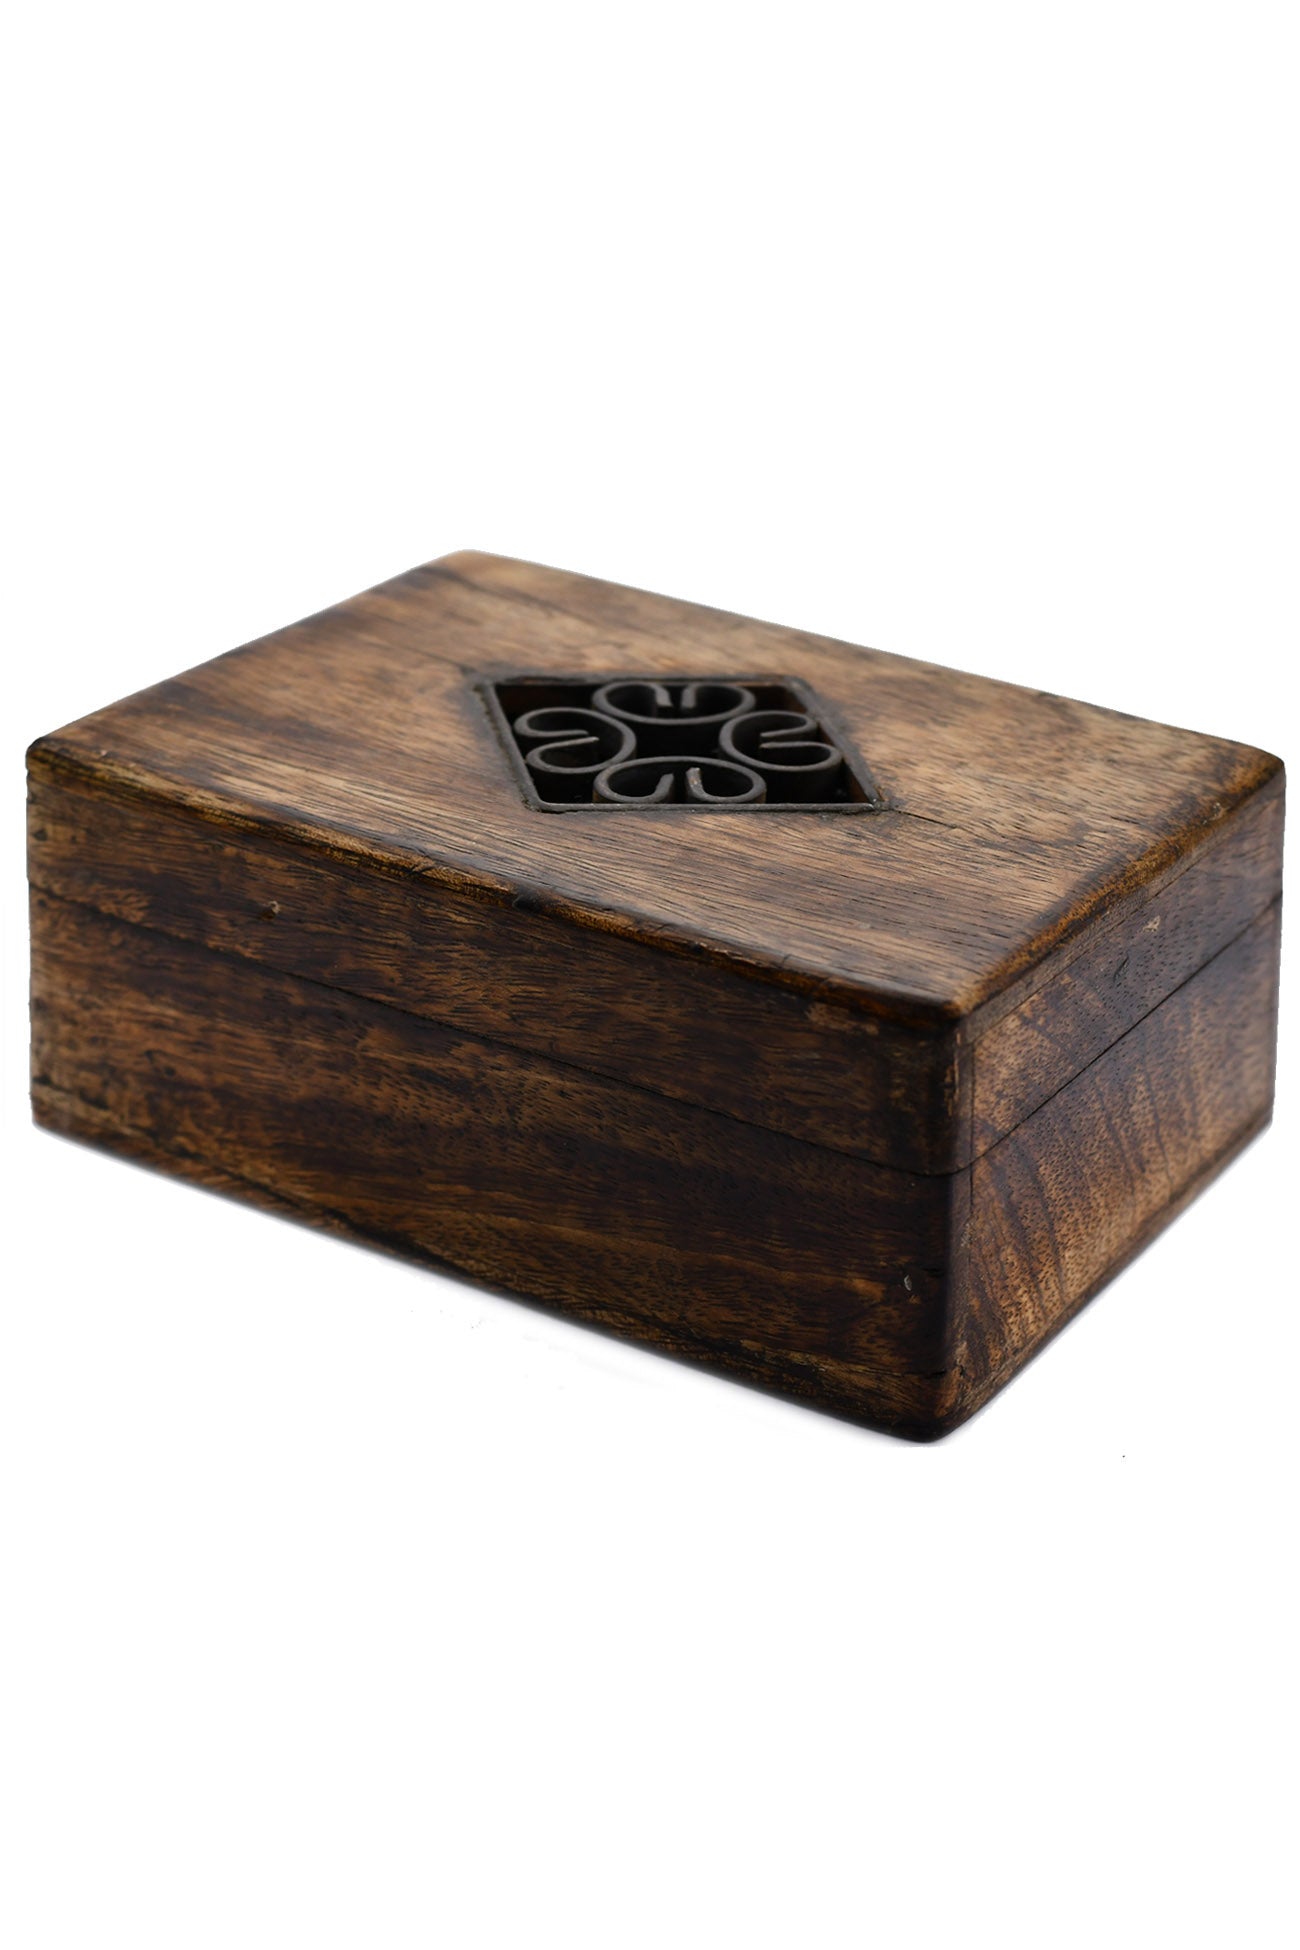 Handmade Dice Boxes - Variety - CLEARANCE